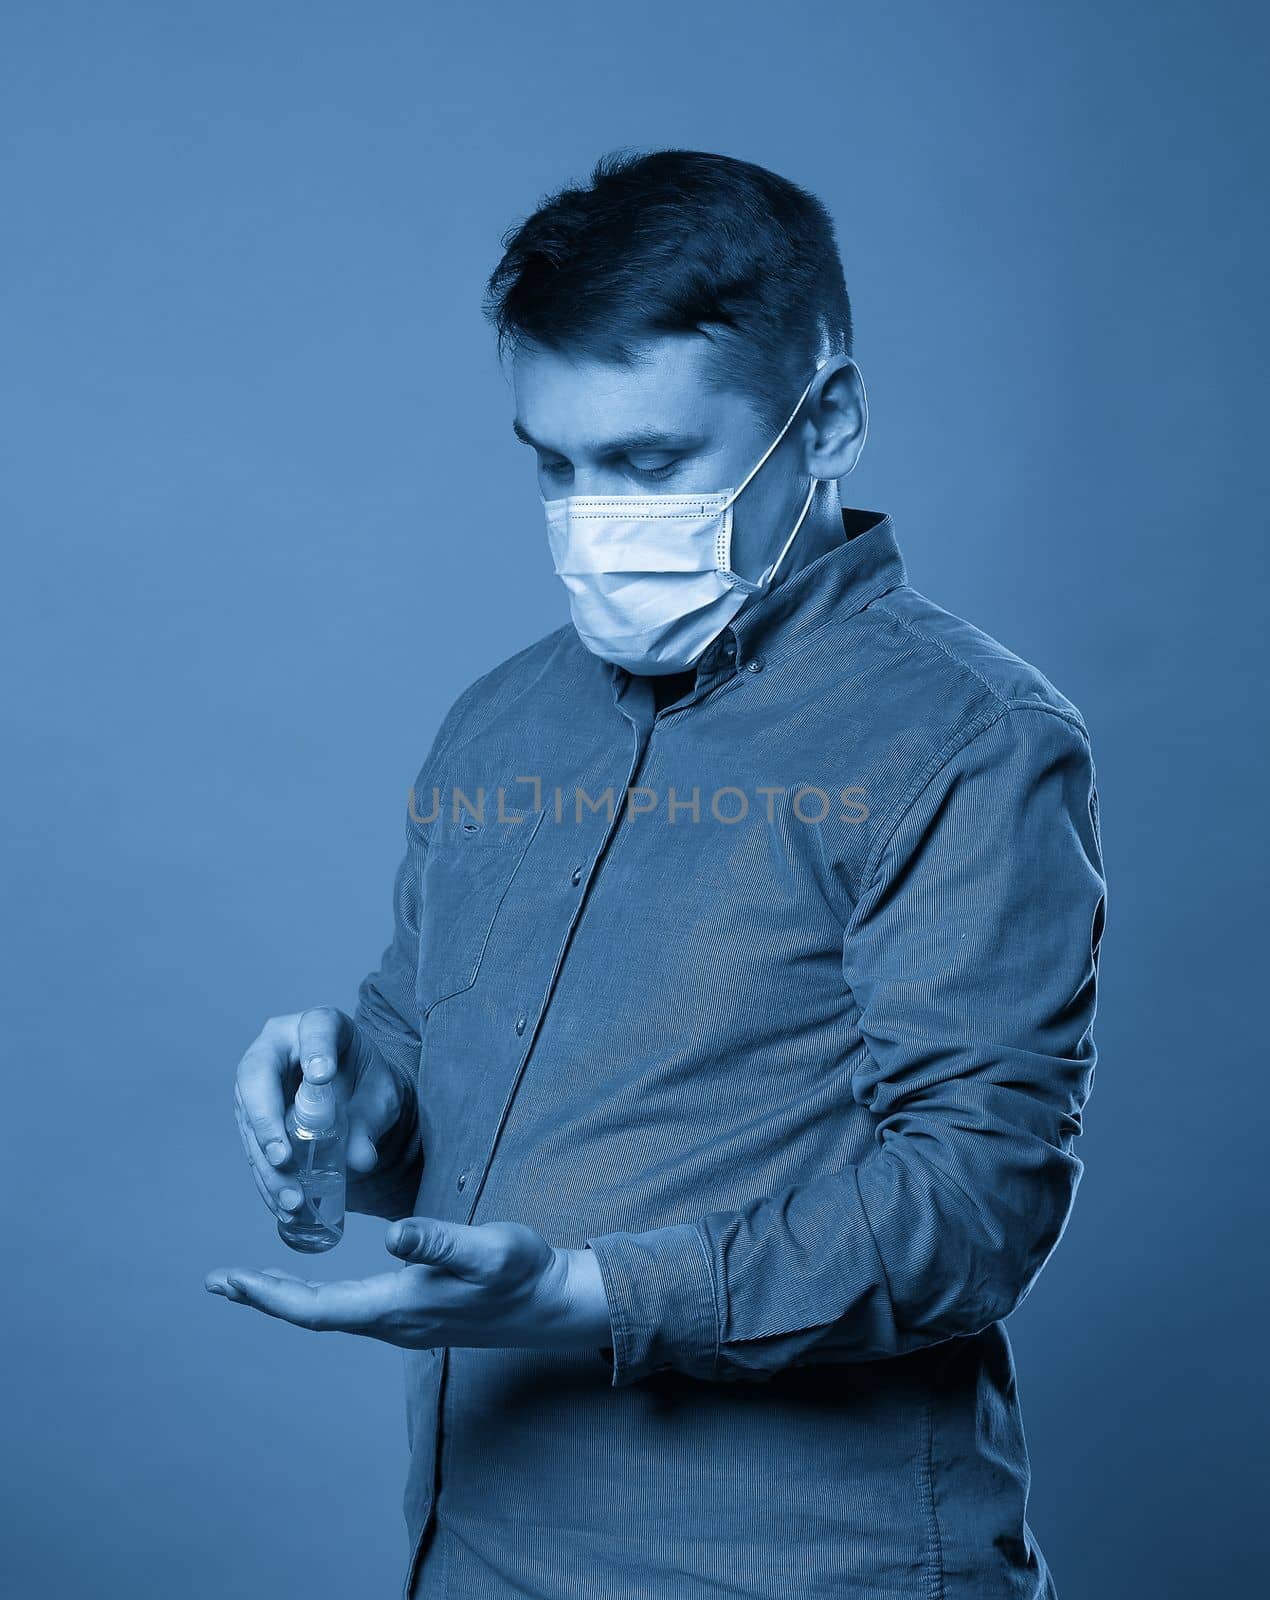 Man applying antibacterial spray on his hands on blue background by Mariakray